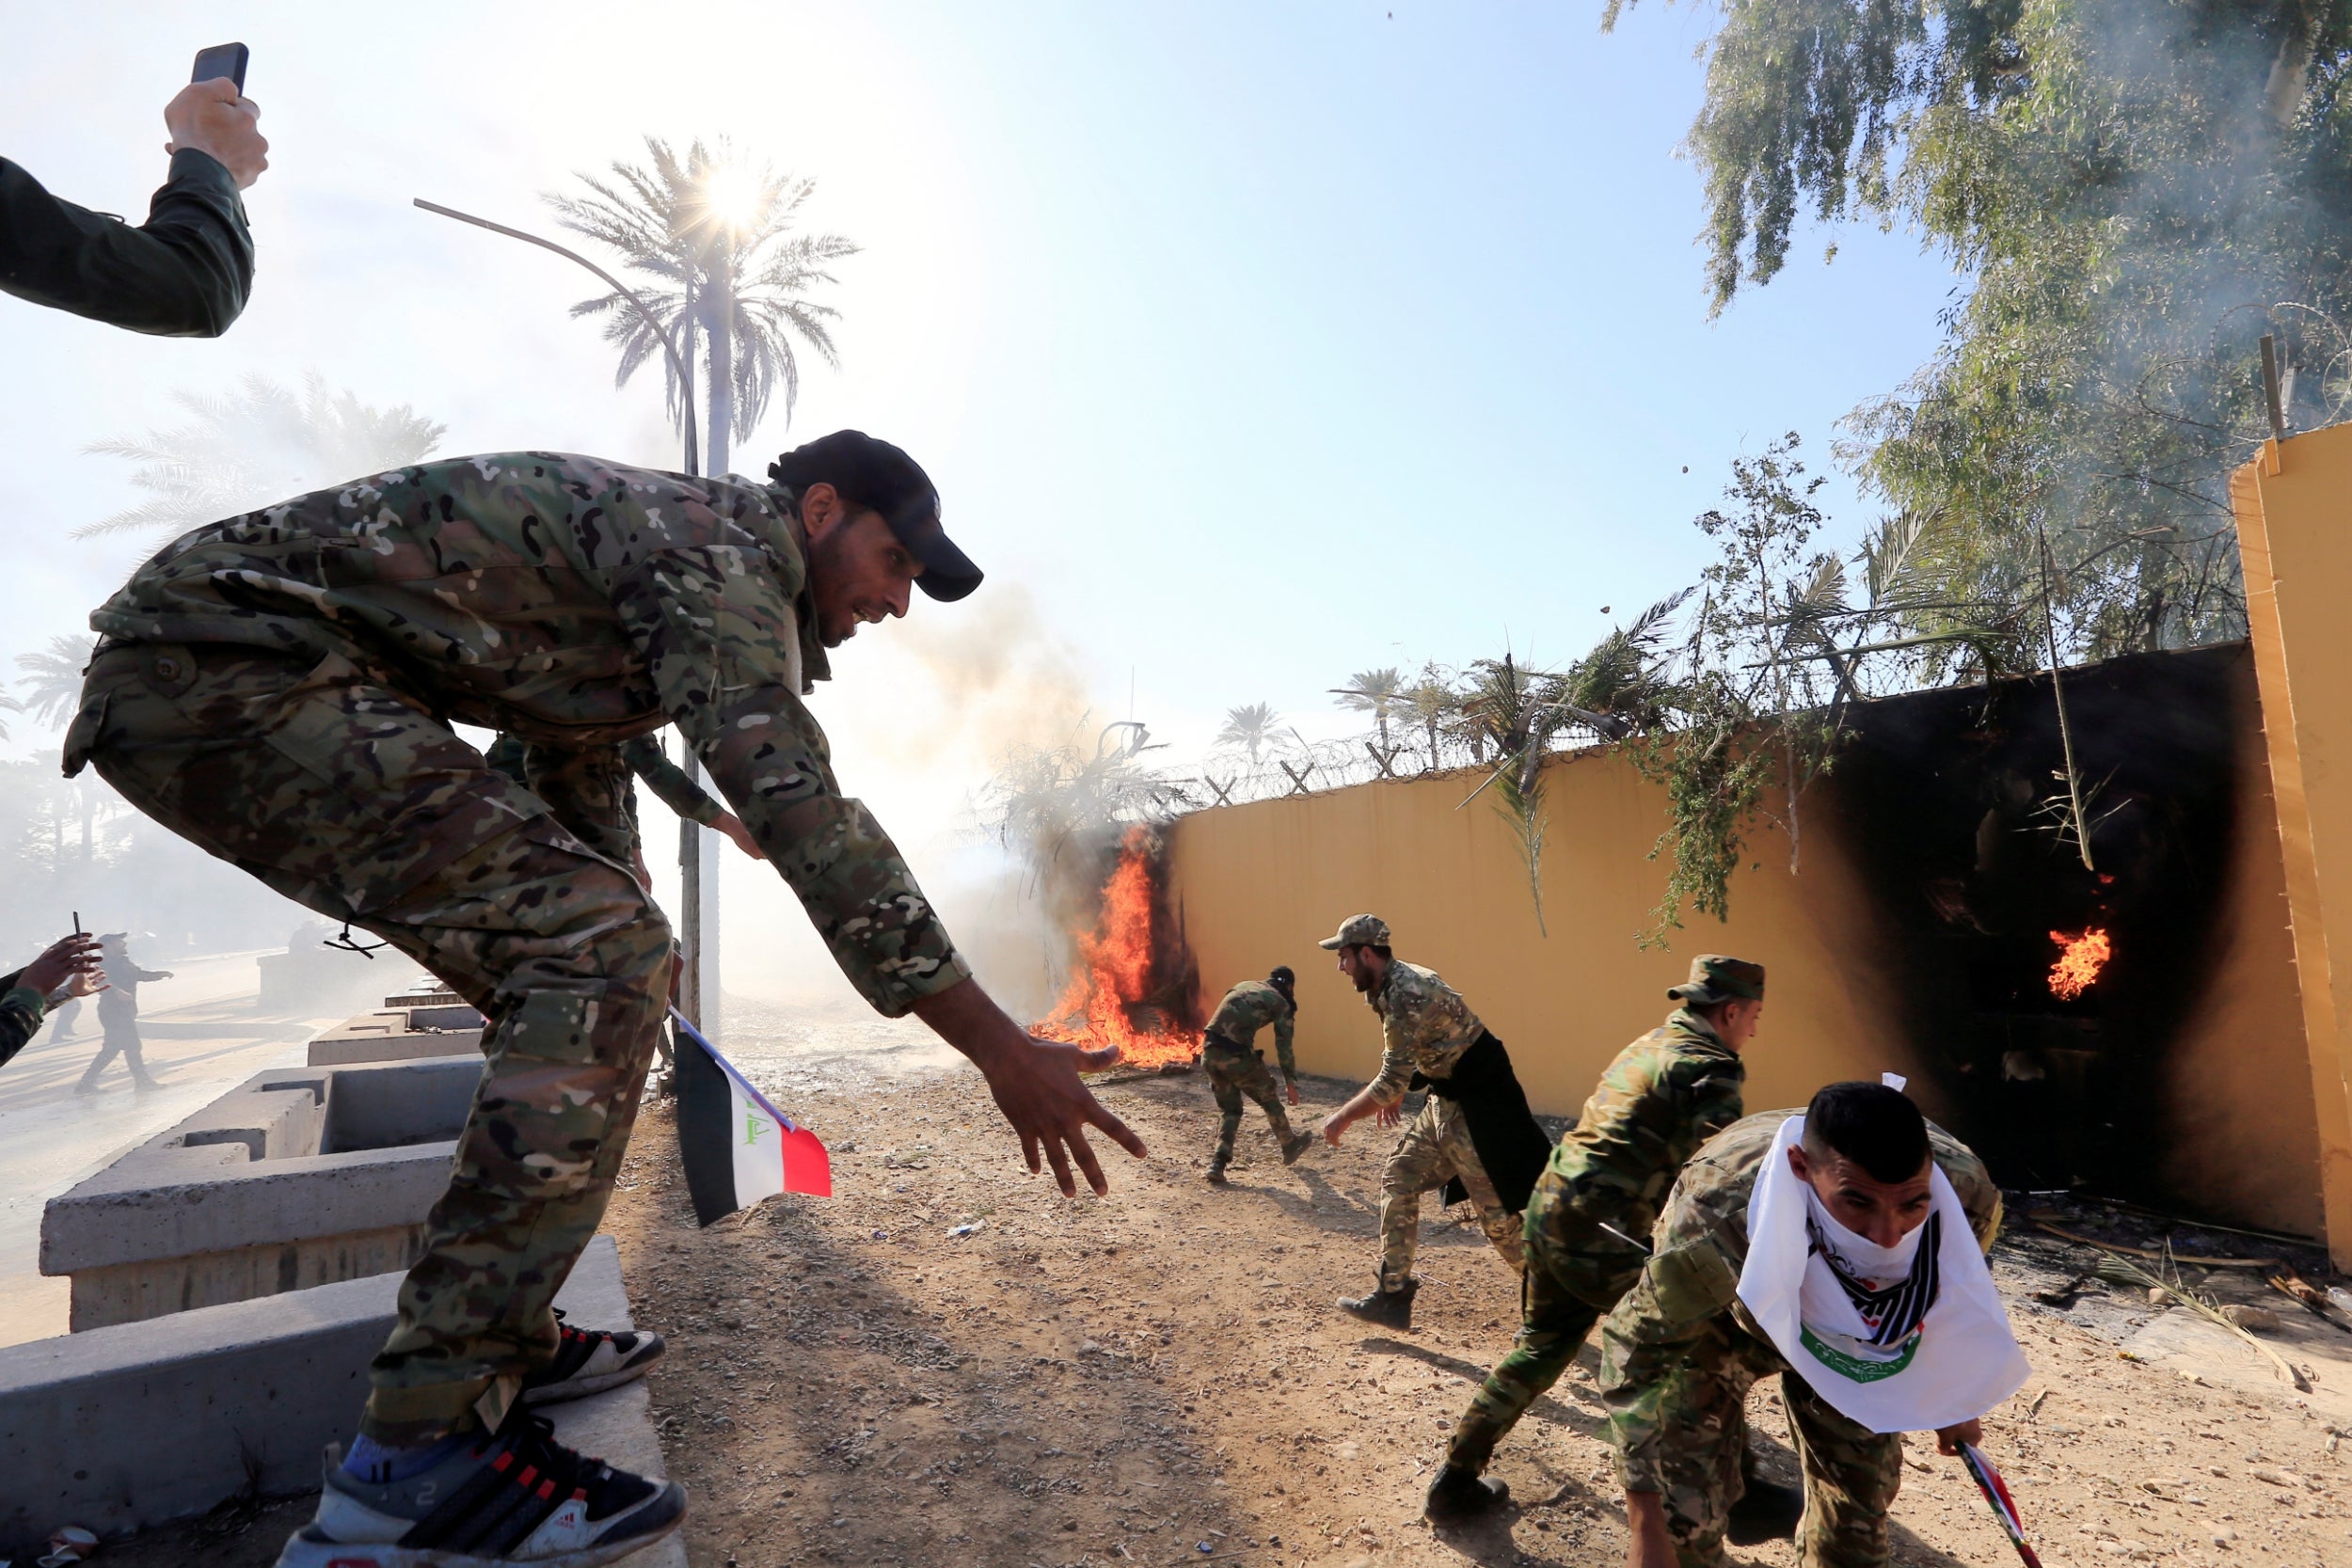 U.S. Marines Move to Reinforce the Baghdad Embassy Compound in Iraq, Dec. 31, 2019